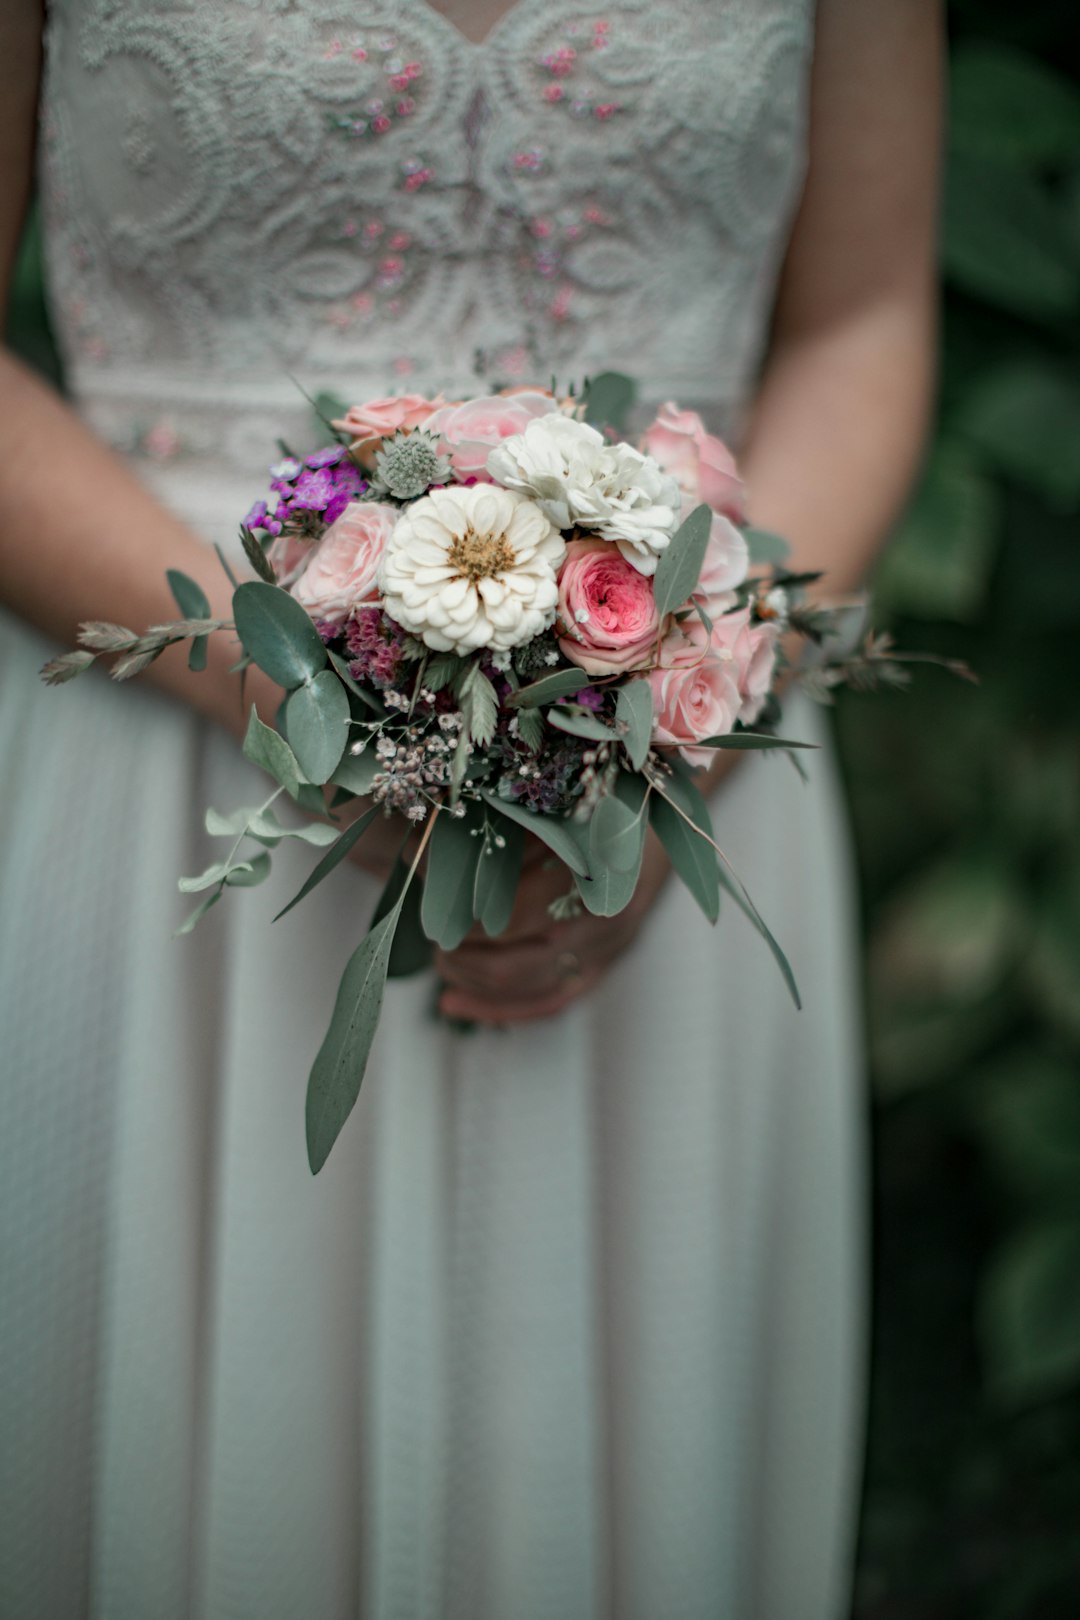 woman in white floral dress holding pink and white flower bouquet